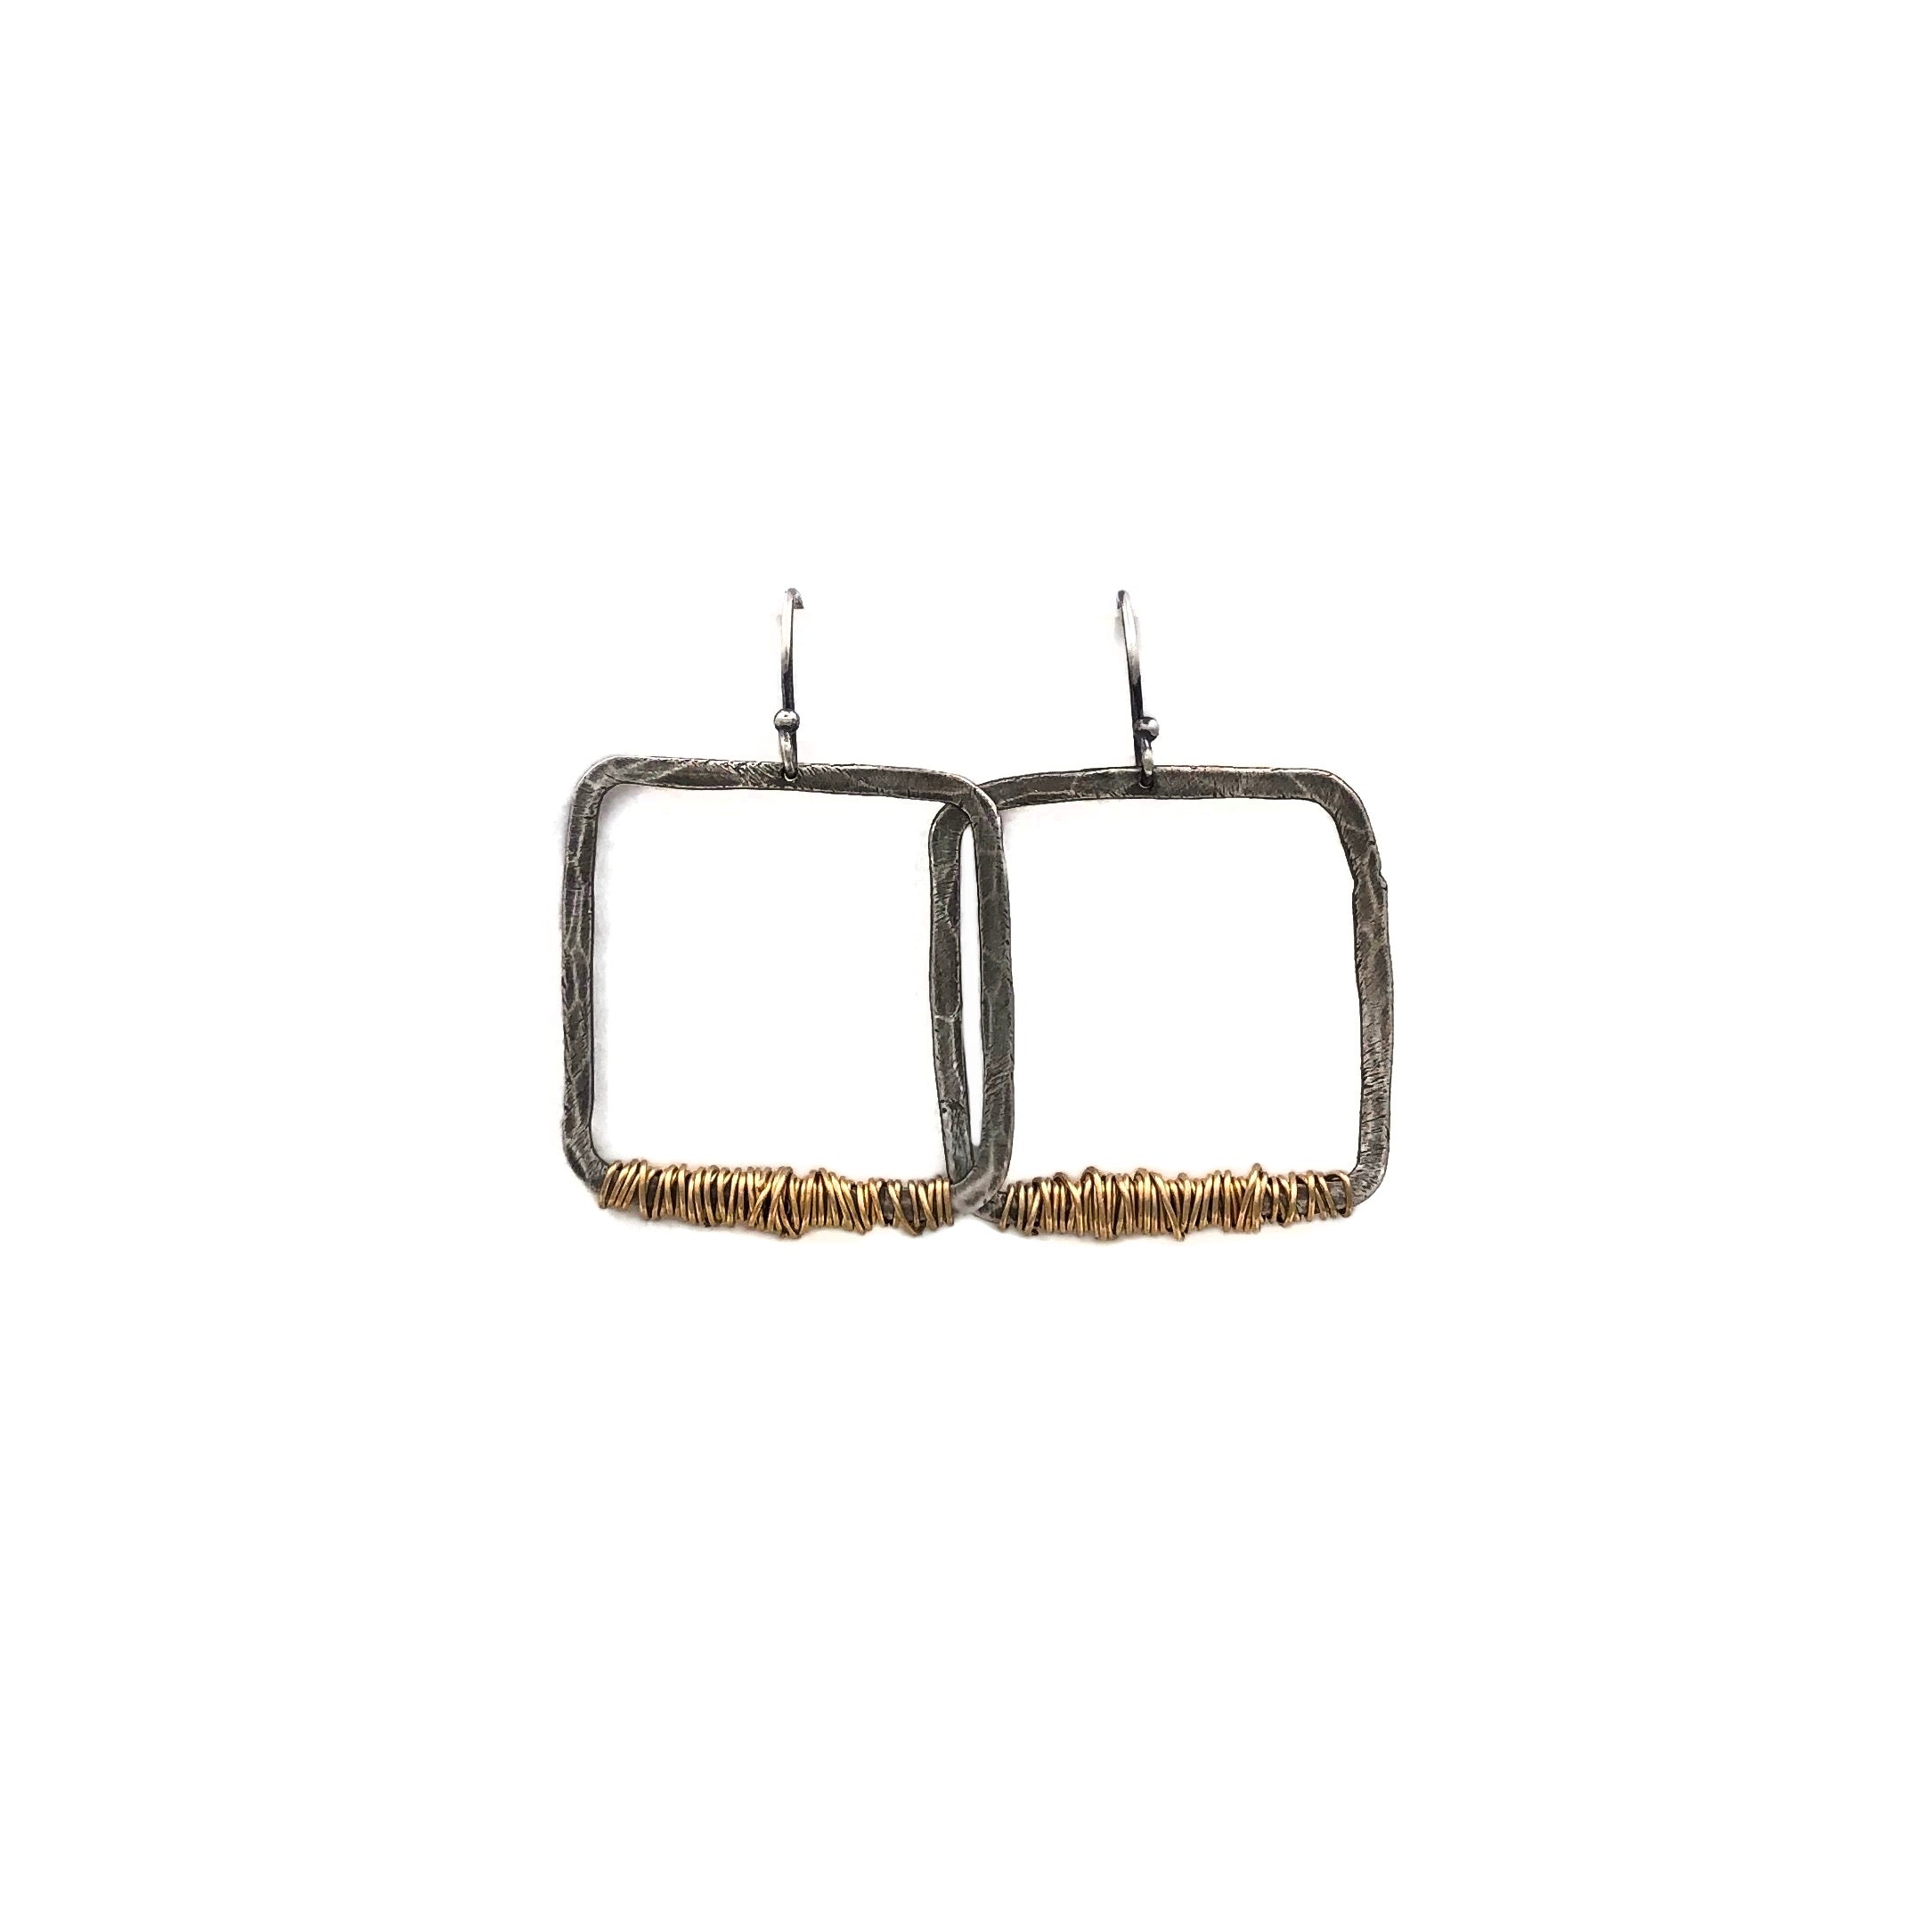 Oxidized Sterling Silver Squares with 14KT Gold Filled Wire